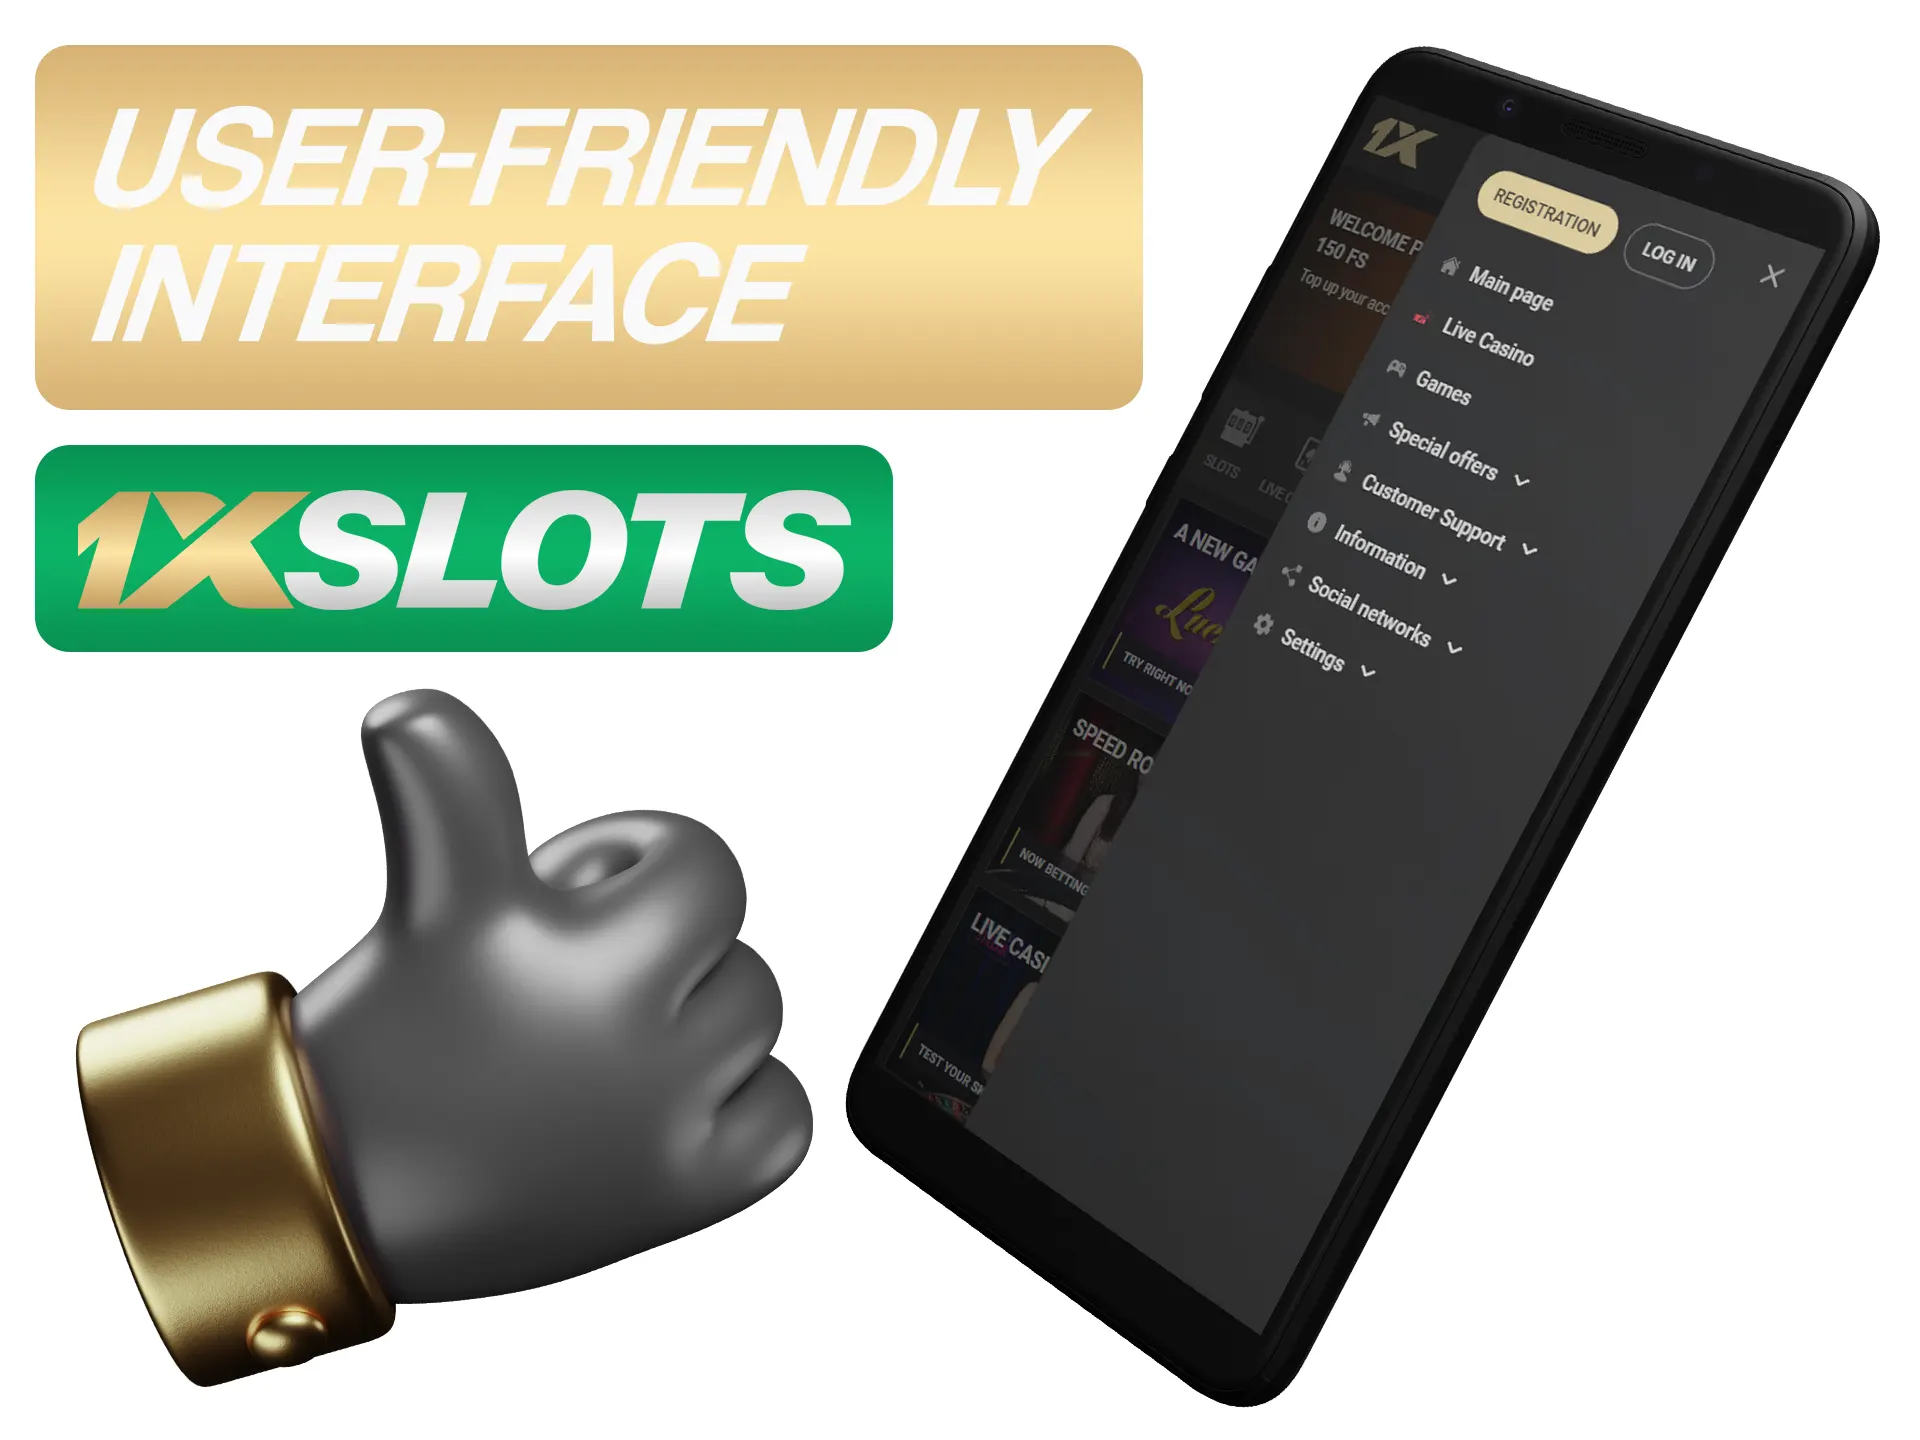 Any person can use 1xSlots app.